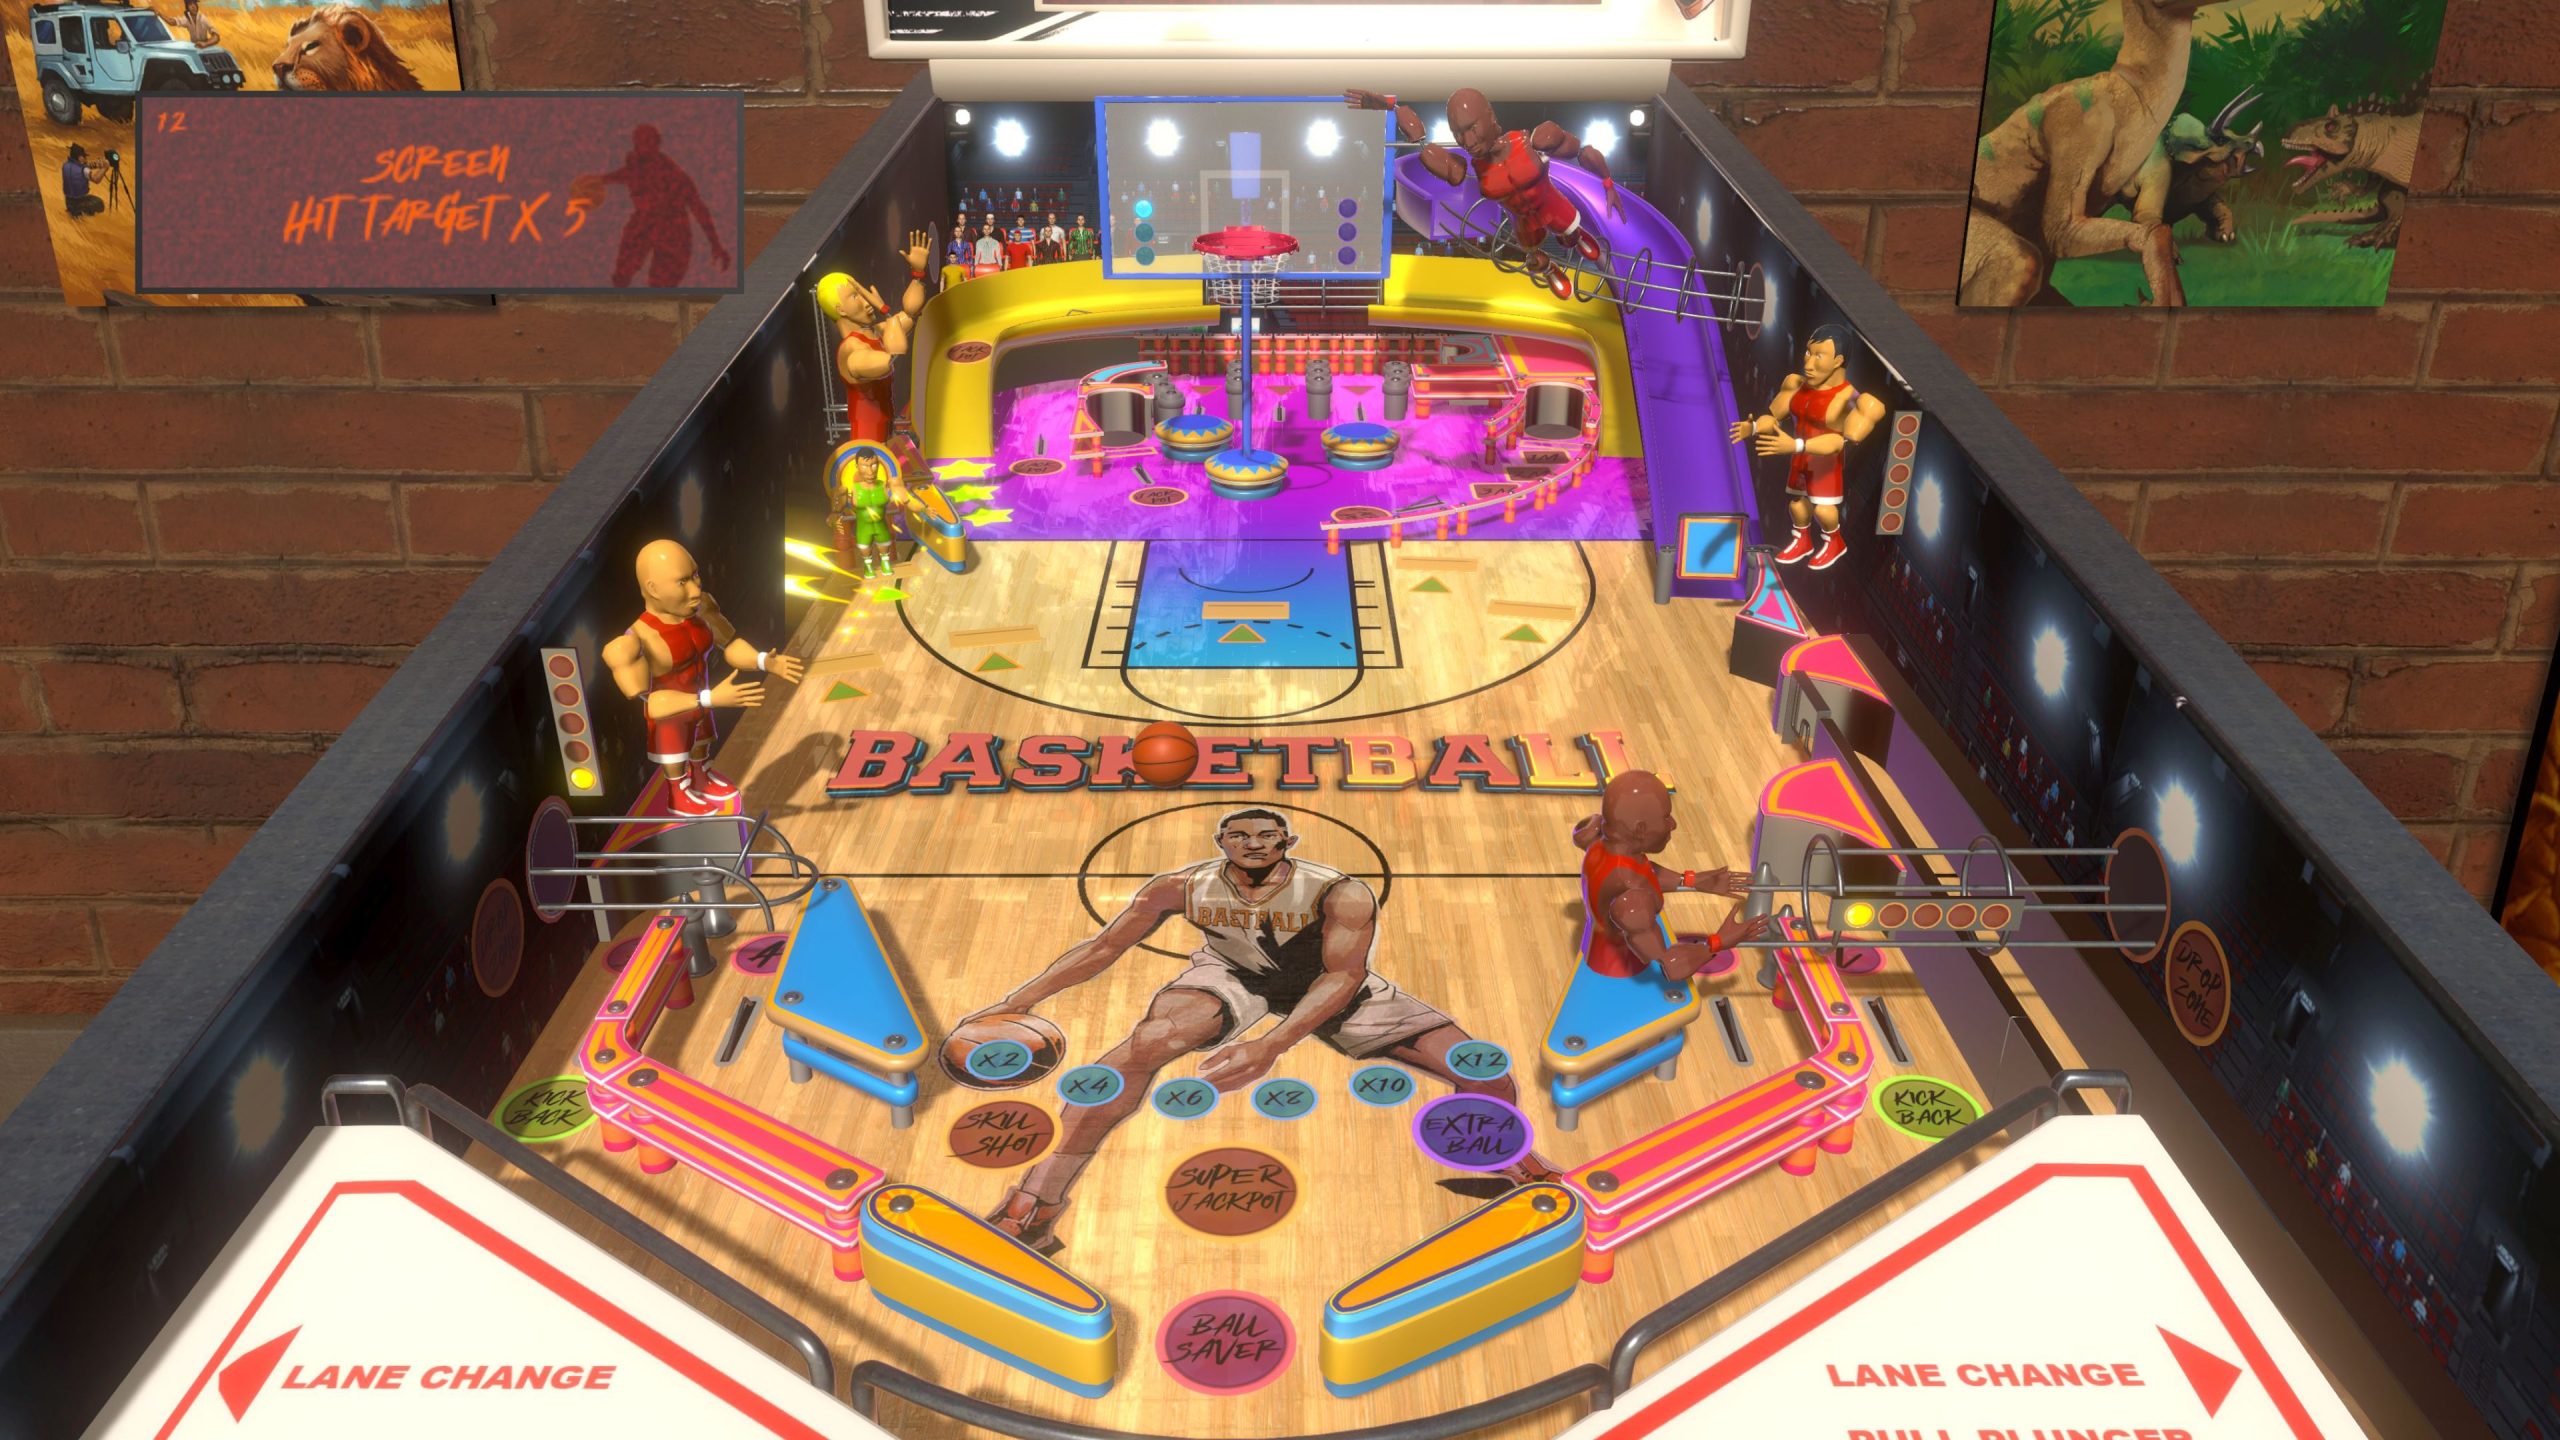 The Pinball Arcade Xbox One Overview